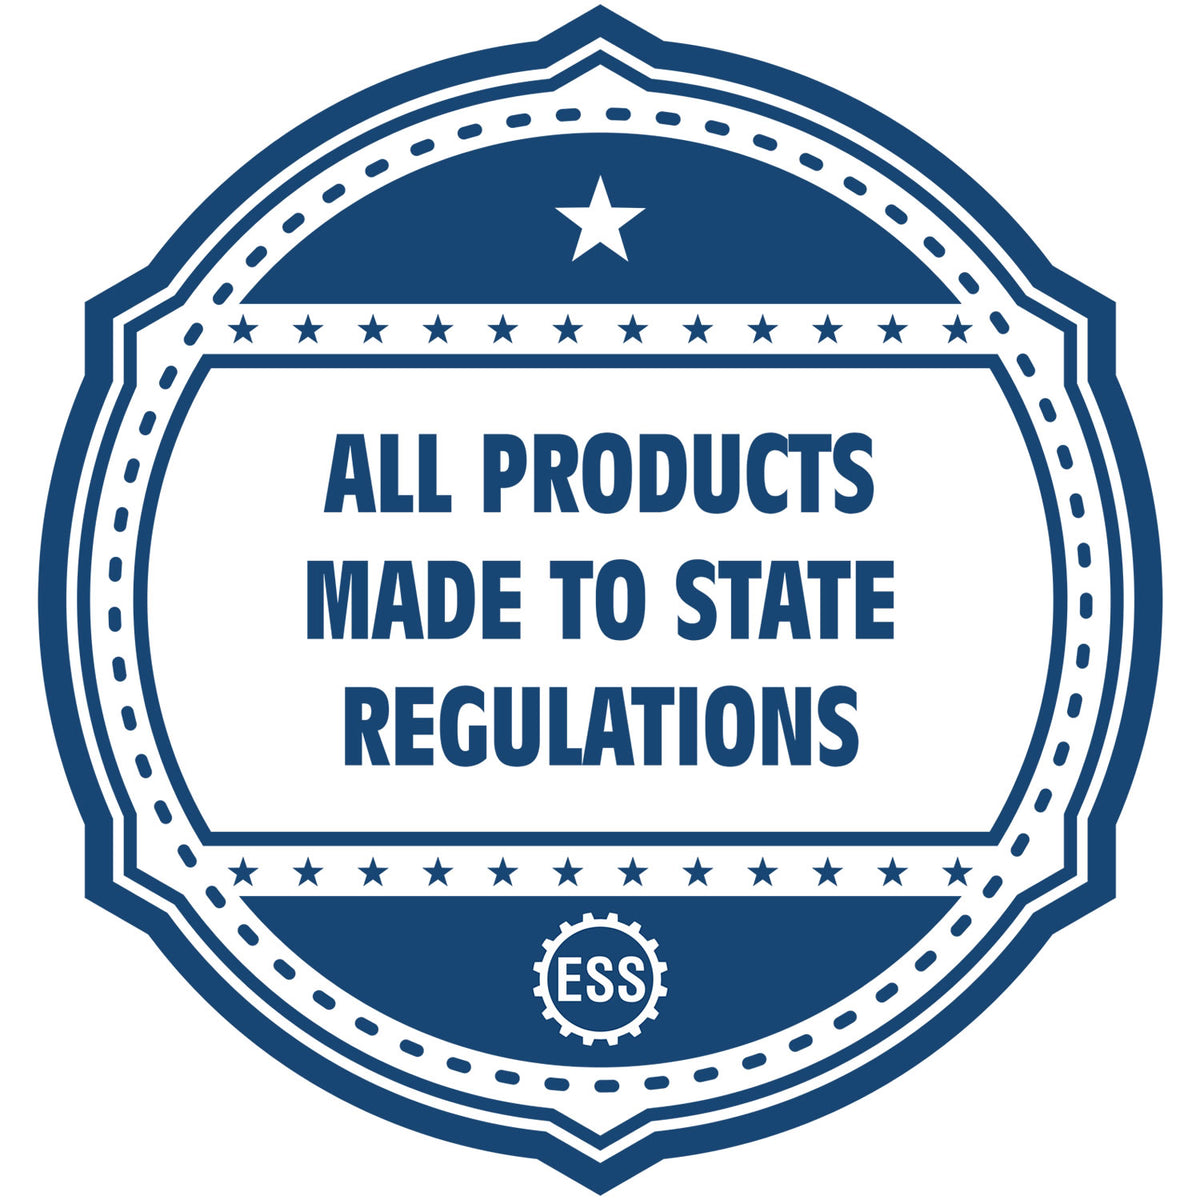 An icon or badge element for the Handheld District of Columbia Professional Engineer Embosser showing that this product is made in compliance with state regulations.